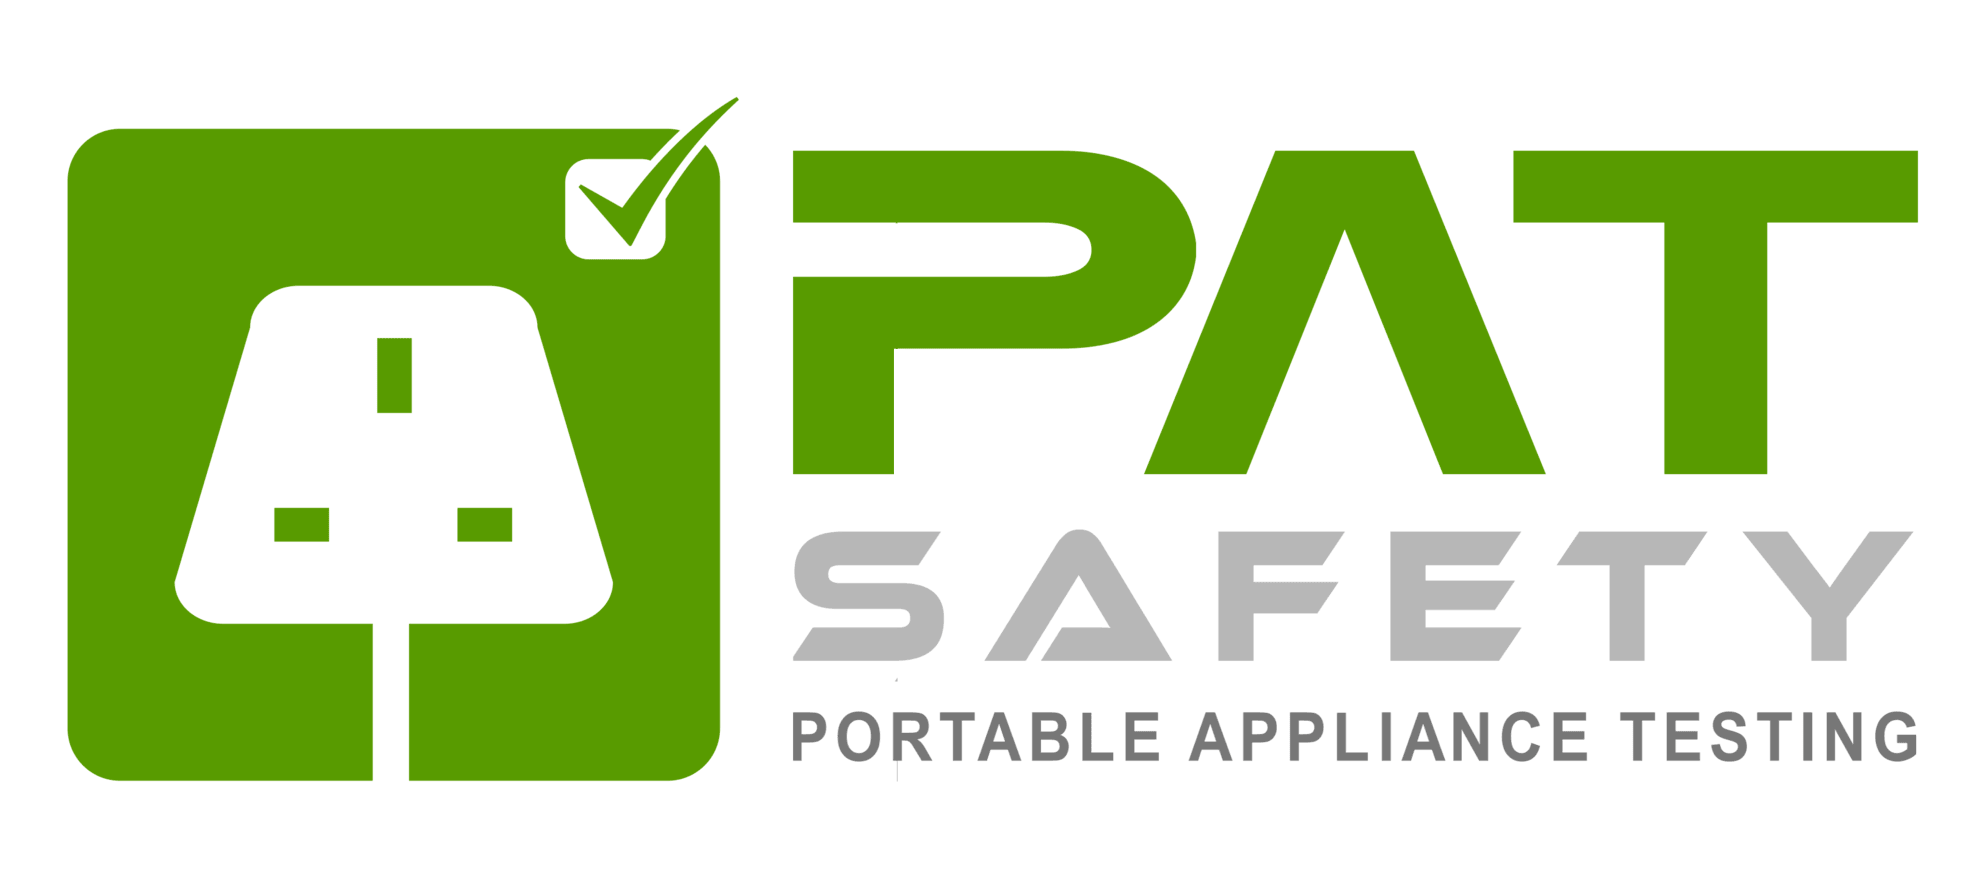 Portable Appliance Testing PAT Safety Testing Approved